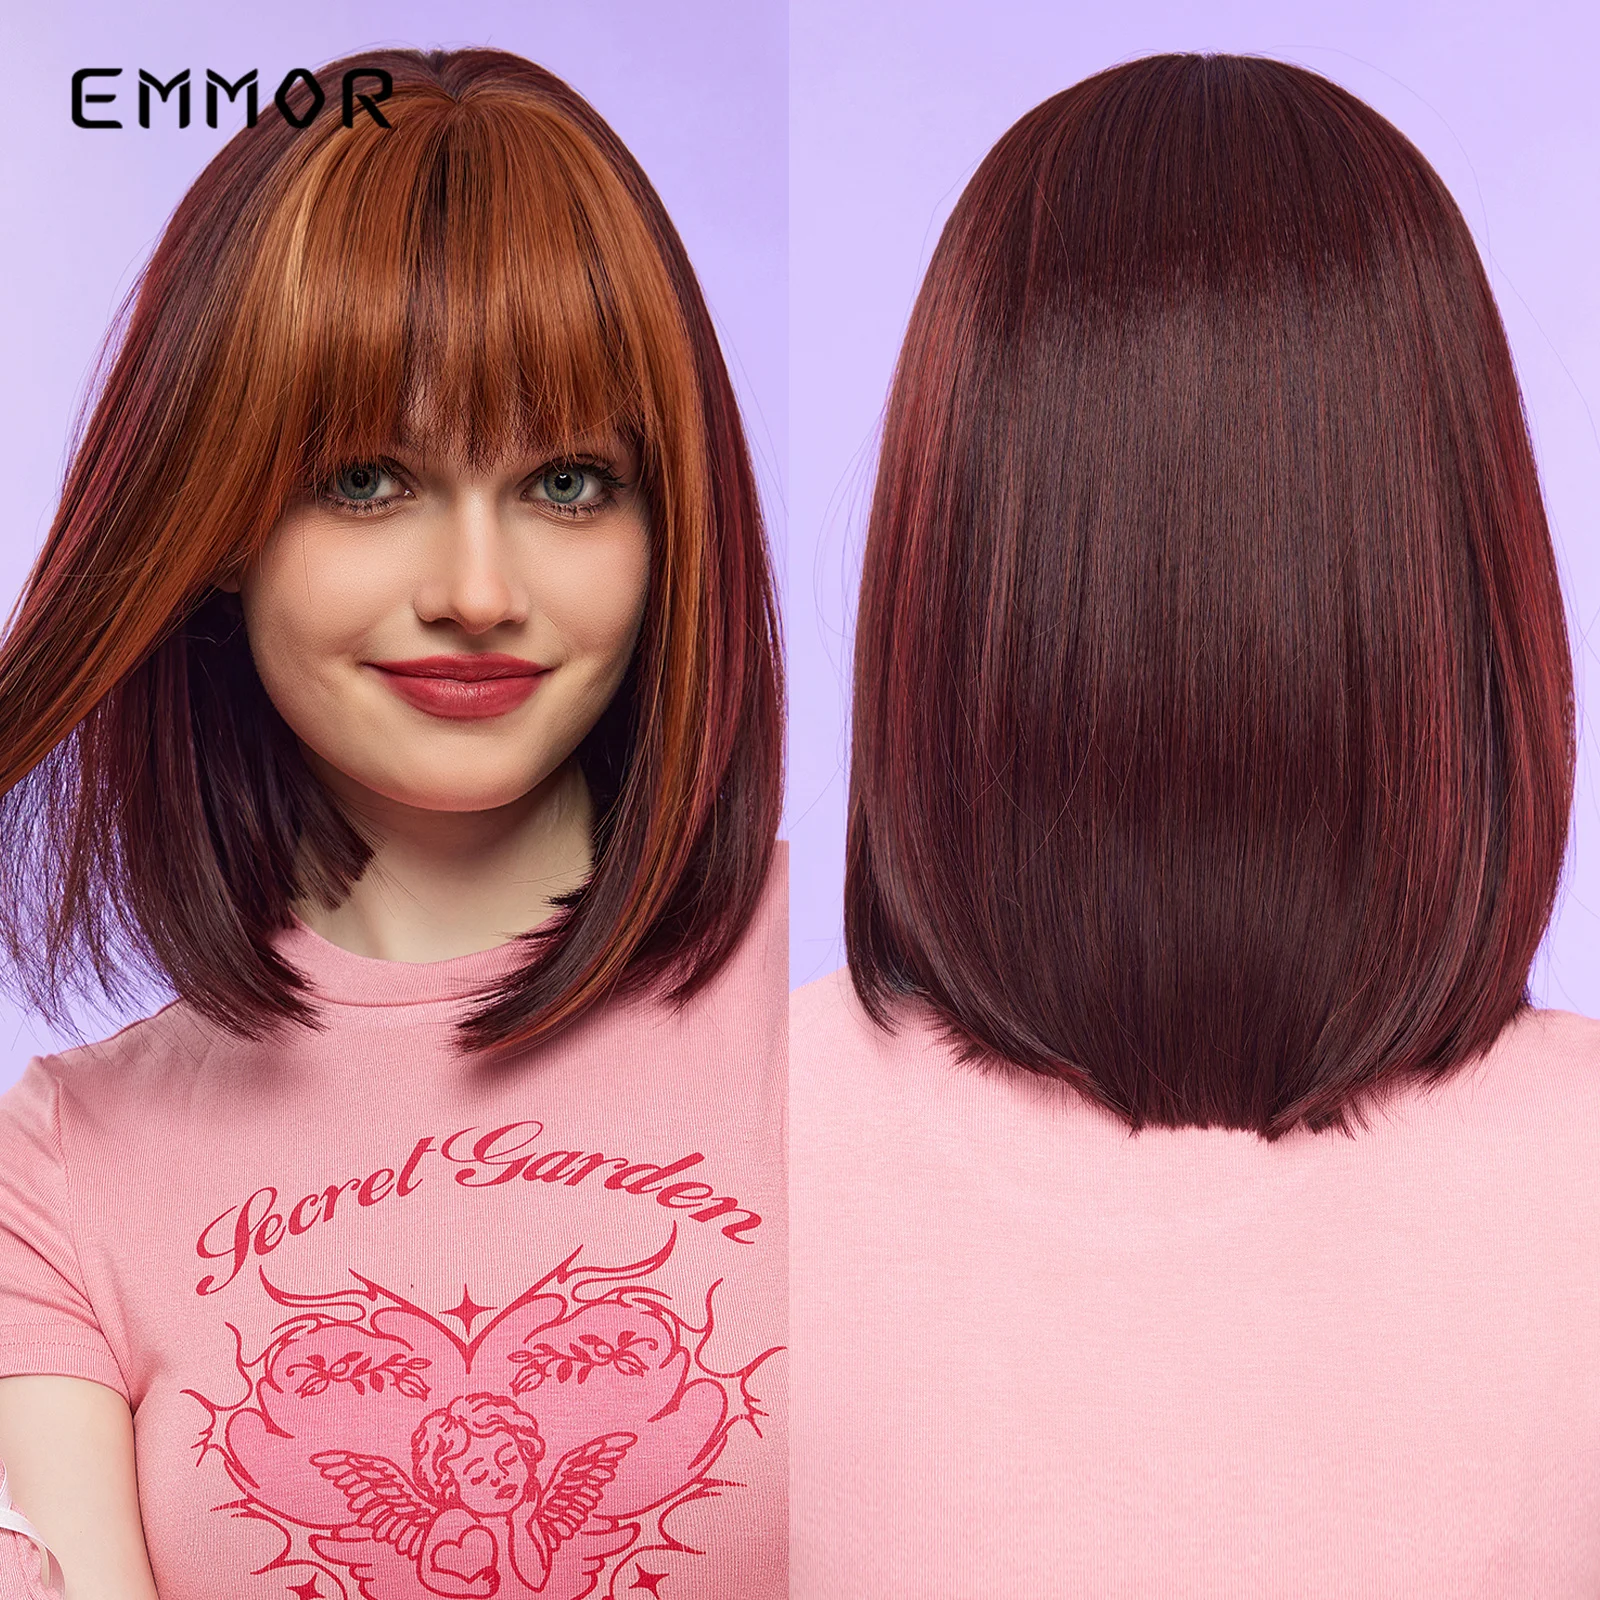 

Emmor Red Short Straight Party Synthetic Wigs Ombre Brown Bang Bob Cosplay Lolita Hair Wigs for Women High Temperature Fake Hair